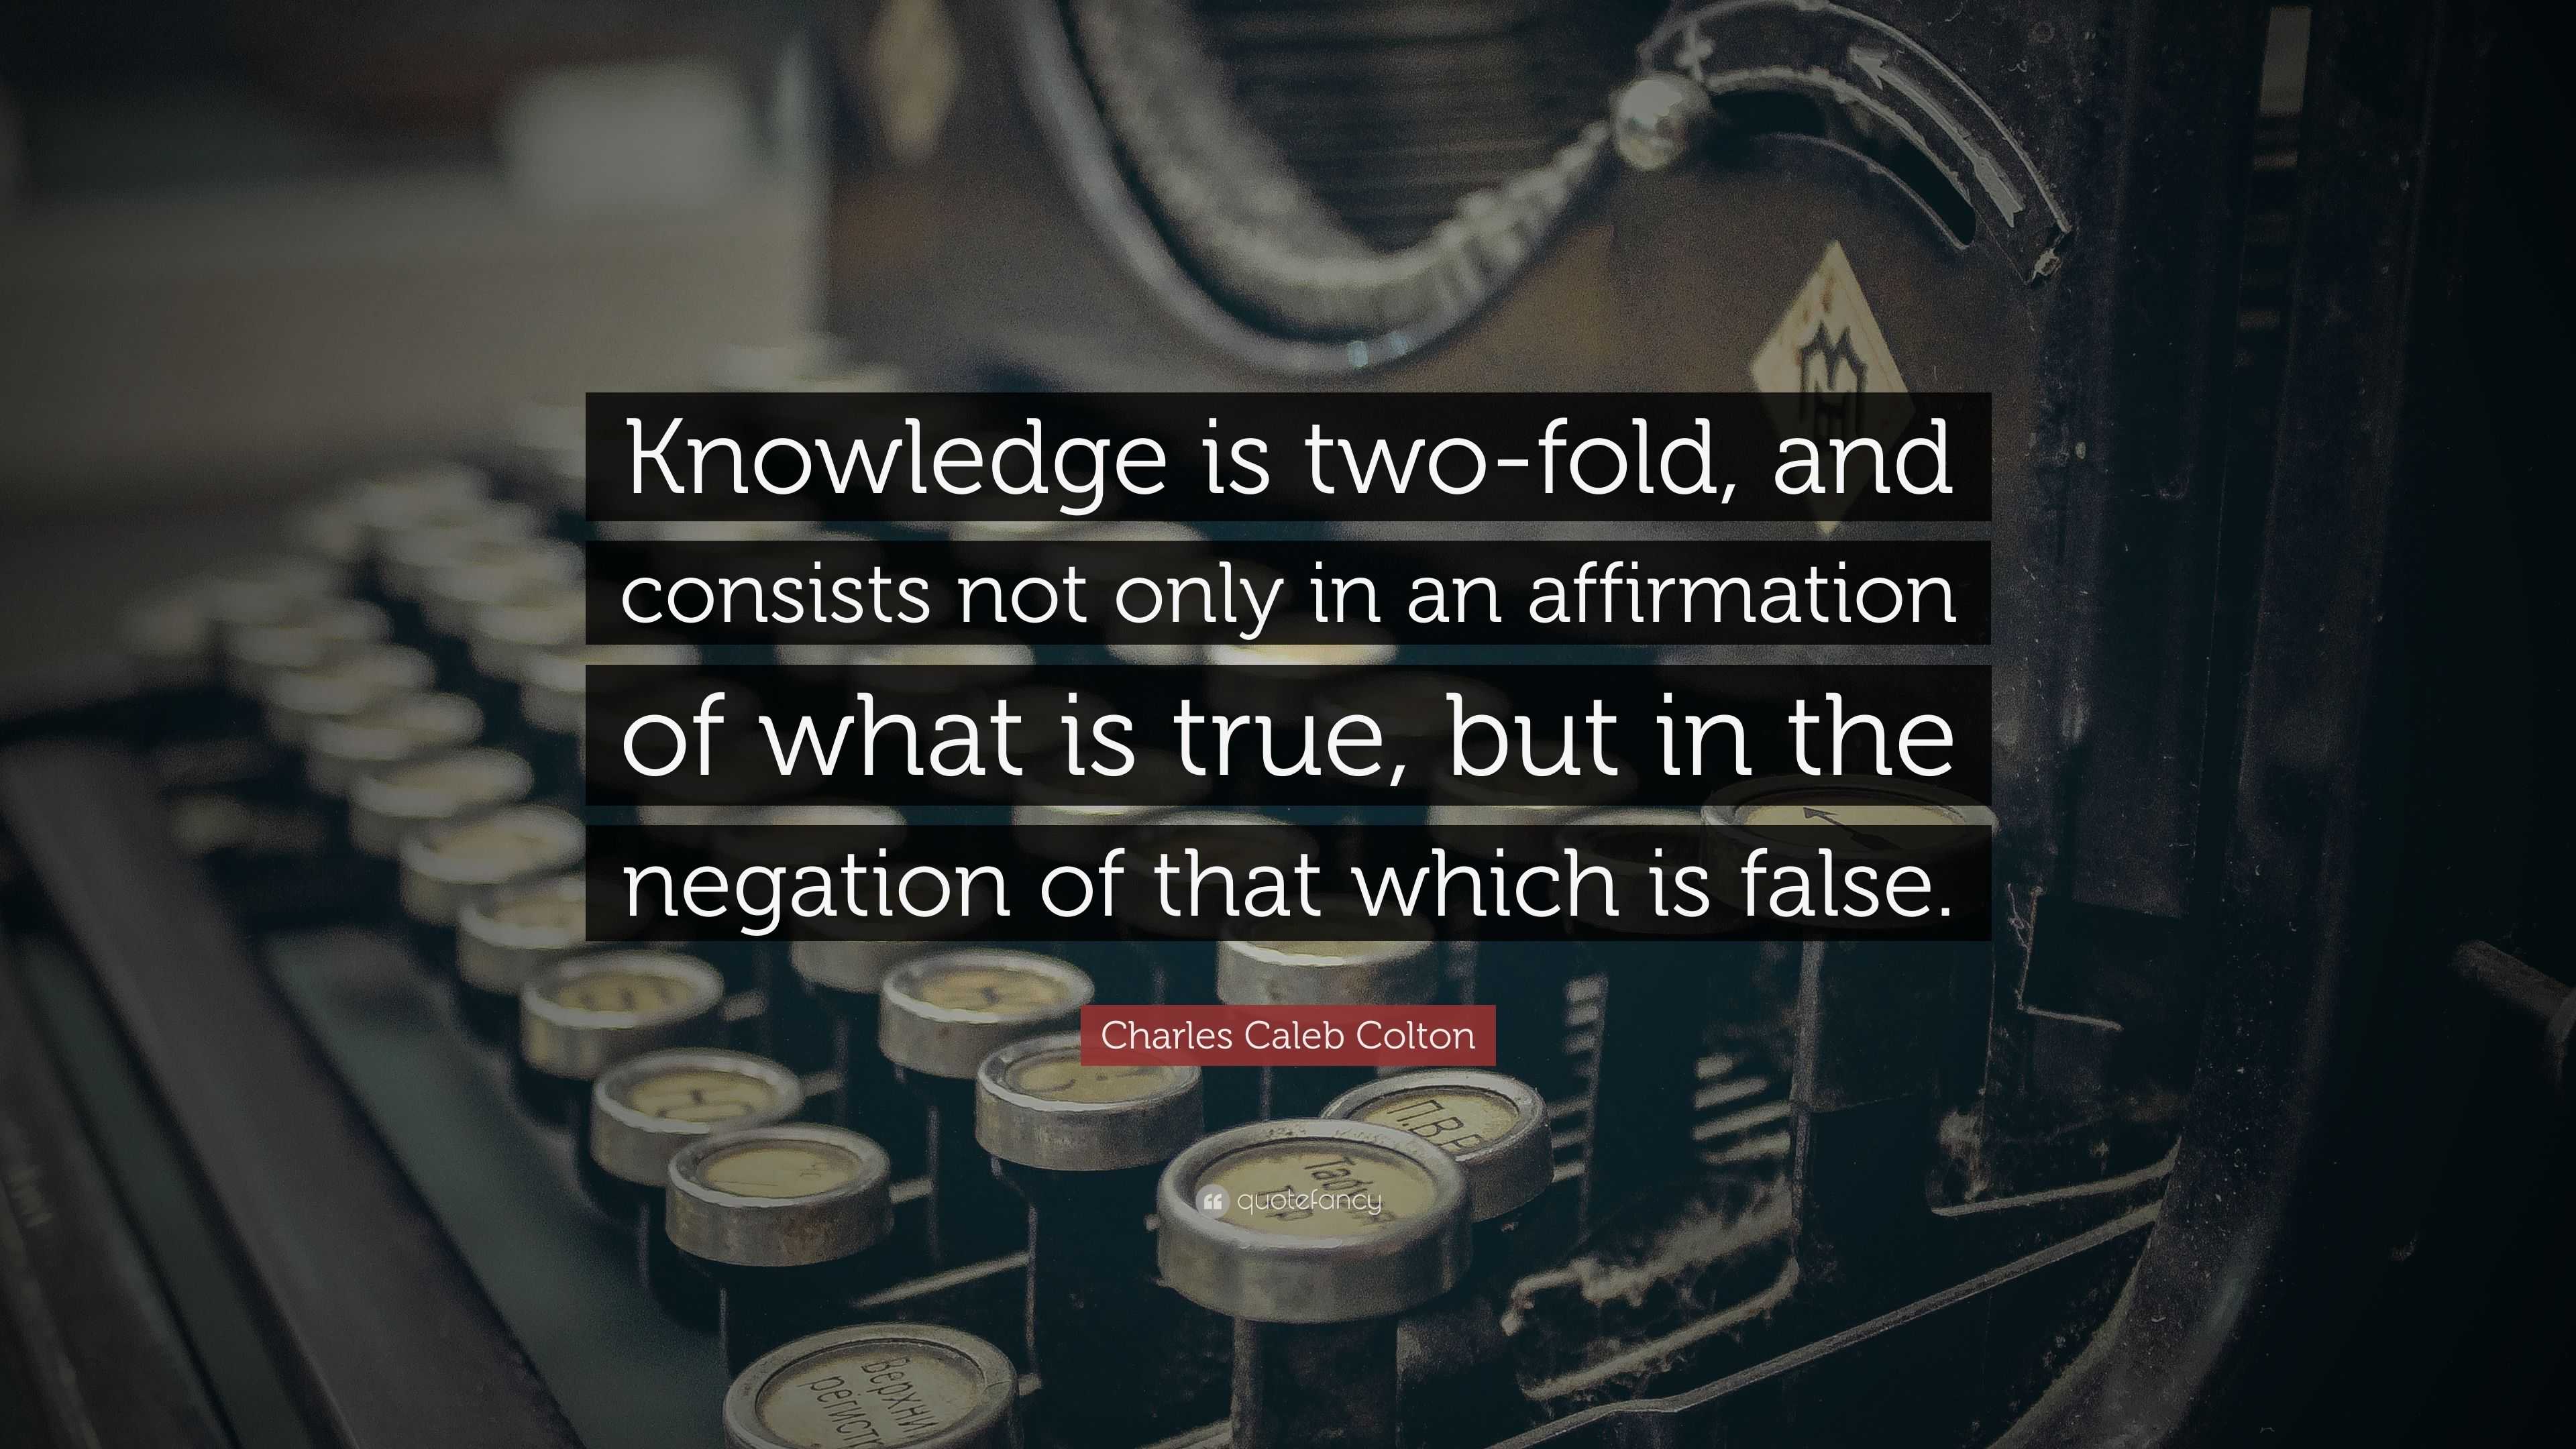 Charles Caleb Colton Quote: “Knowledge is two-fold, and consists